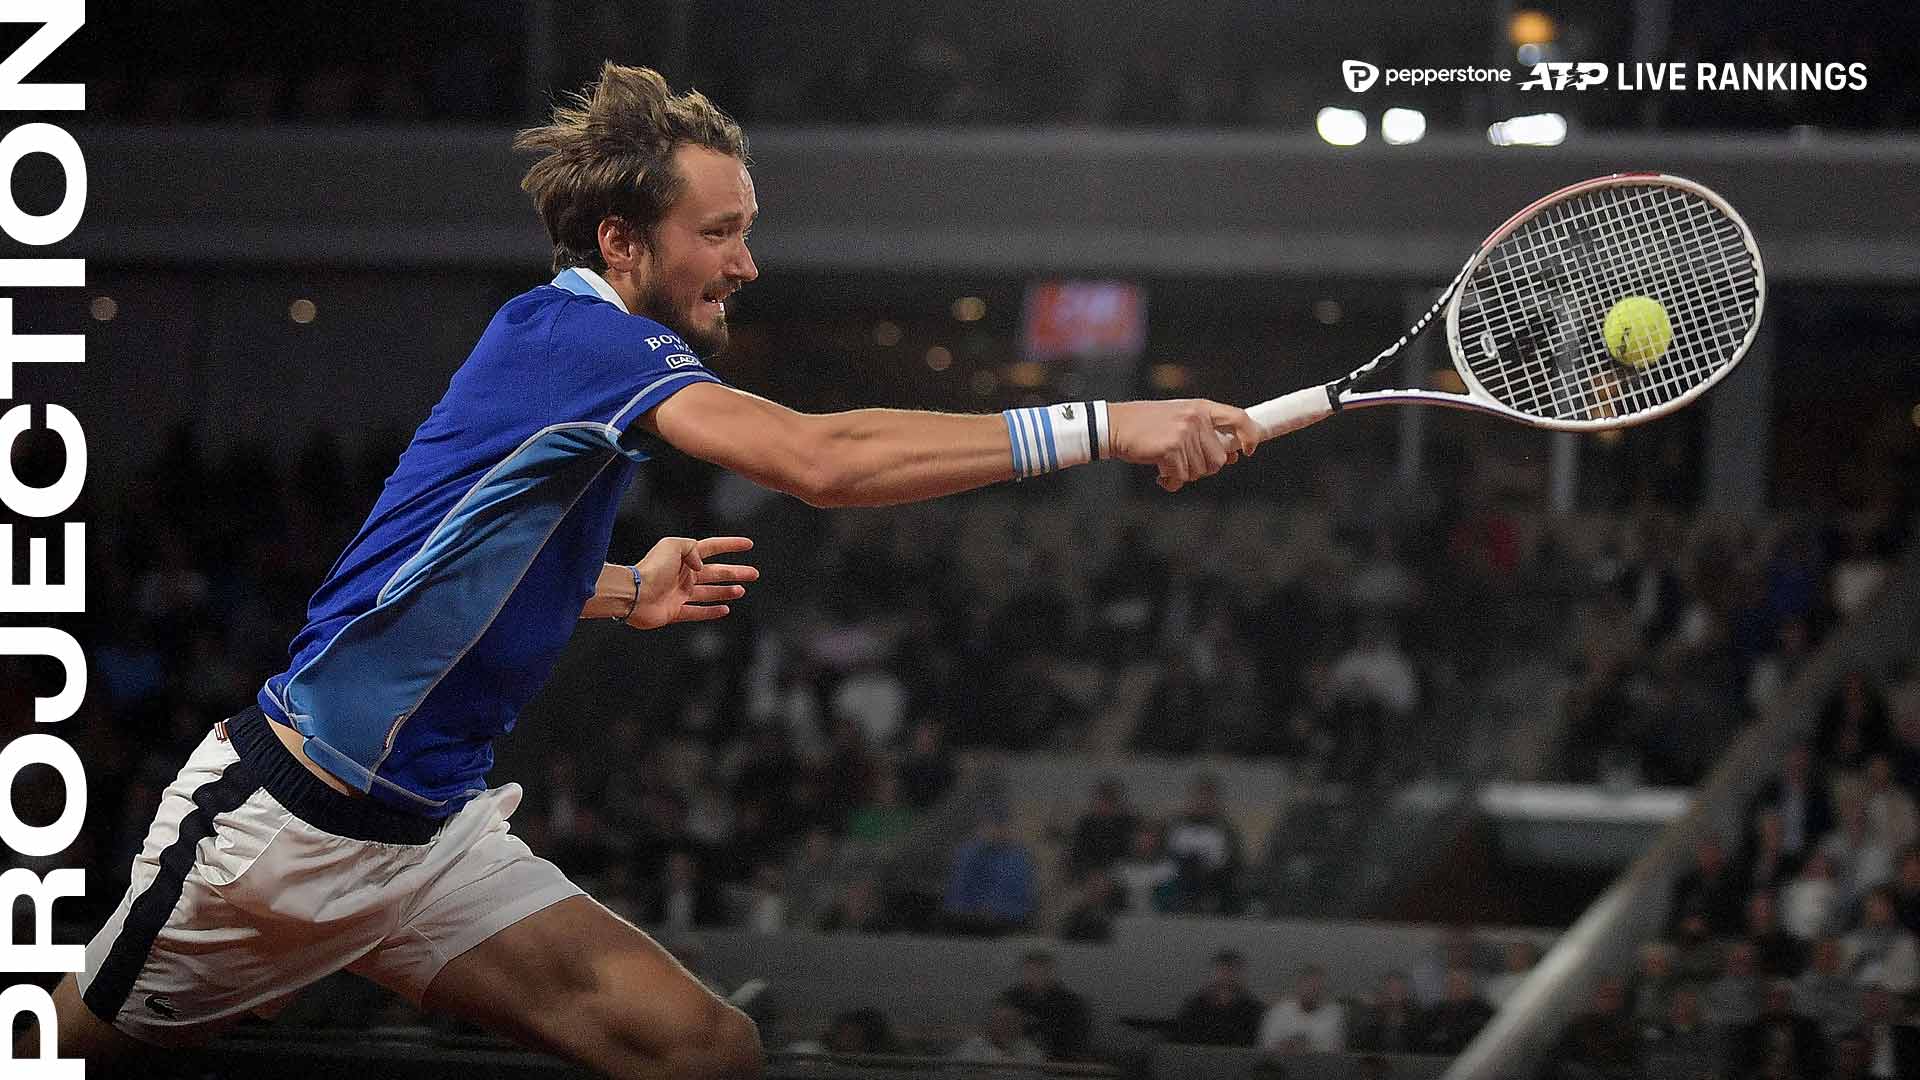 How Daniil Medvedevs Roland Garros Loss Changed The Battle For World No